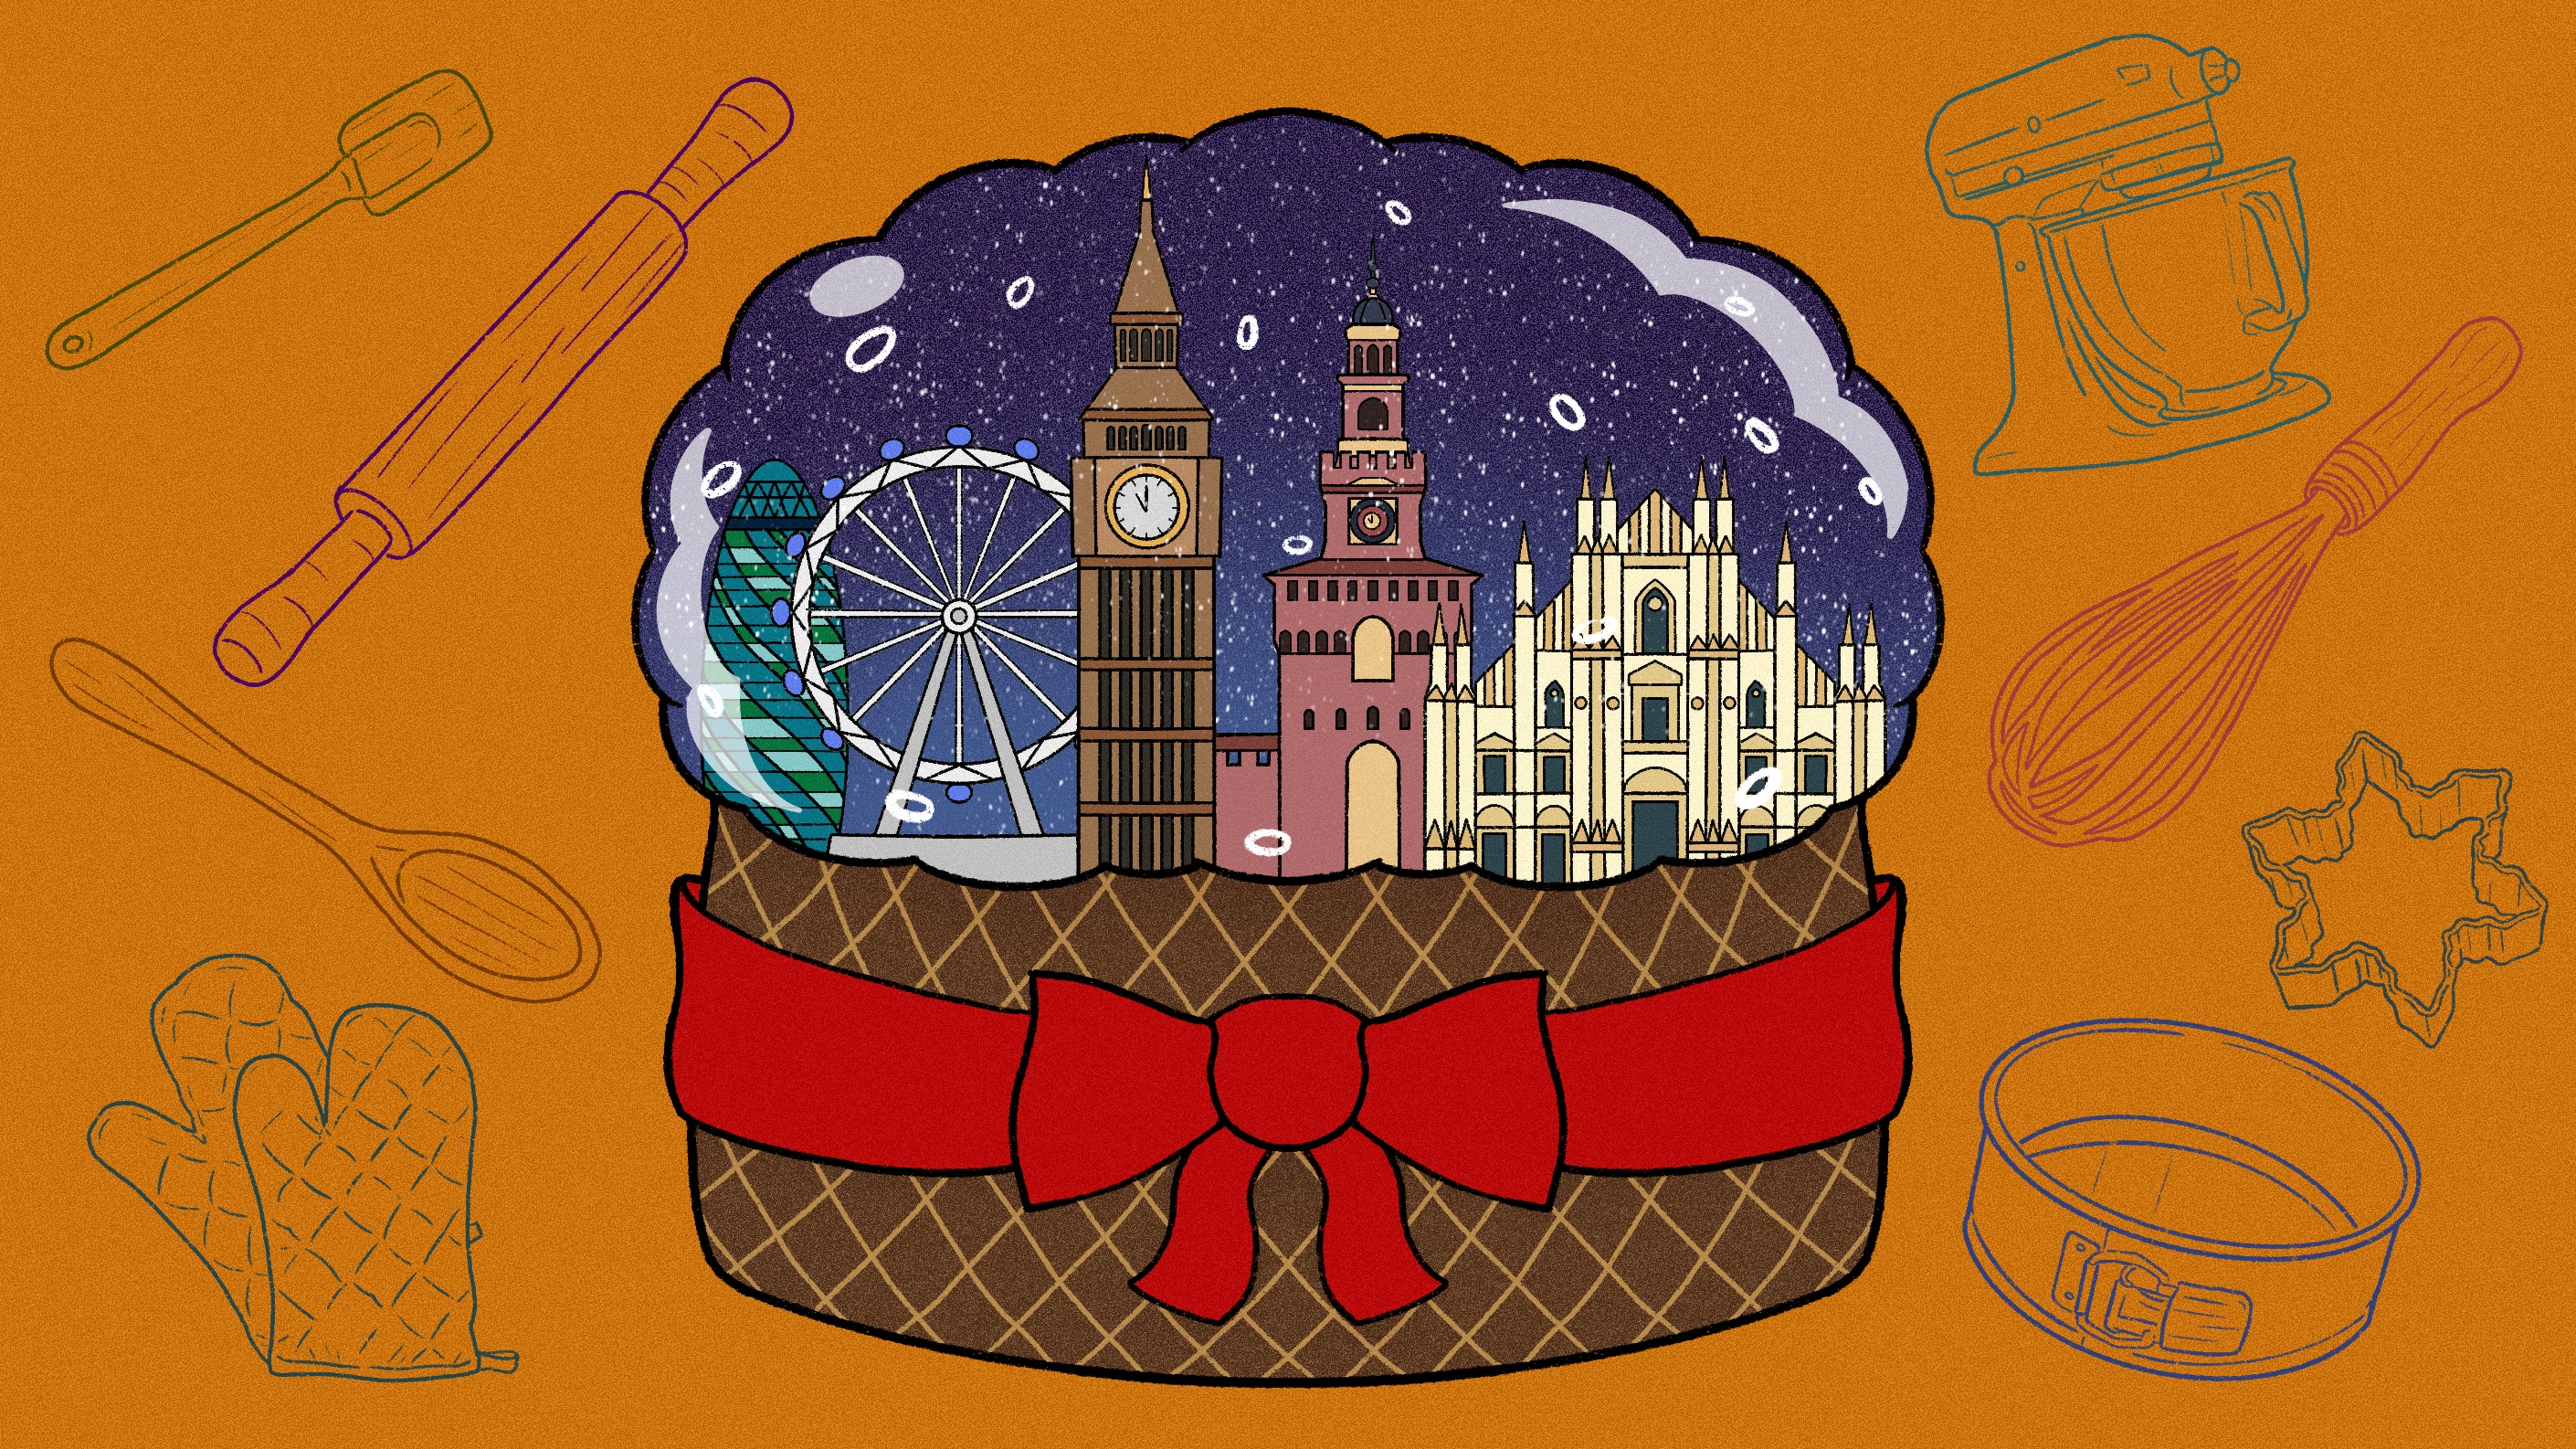 An illustration of panettone with iconic London buildings inside